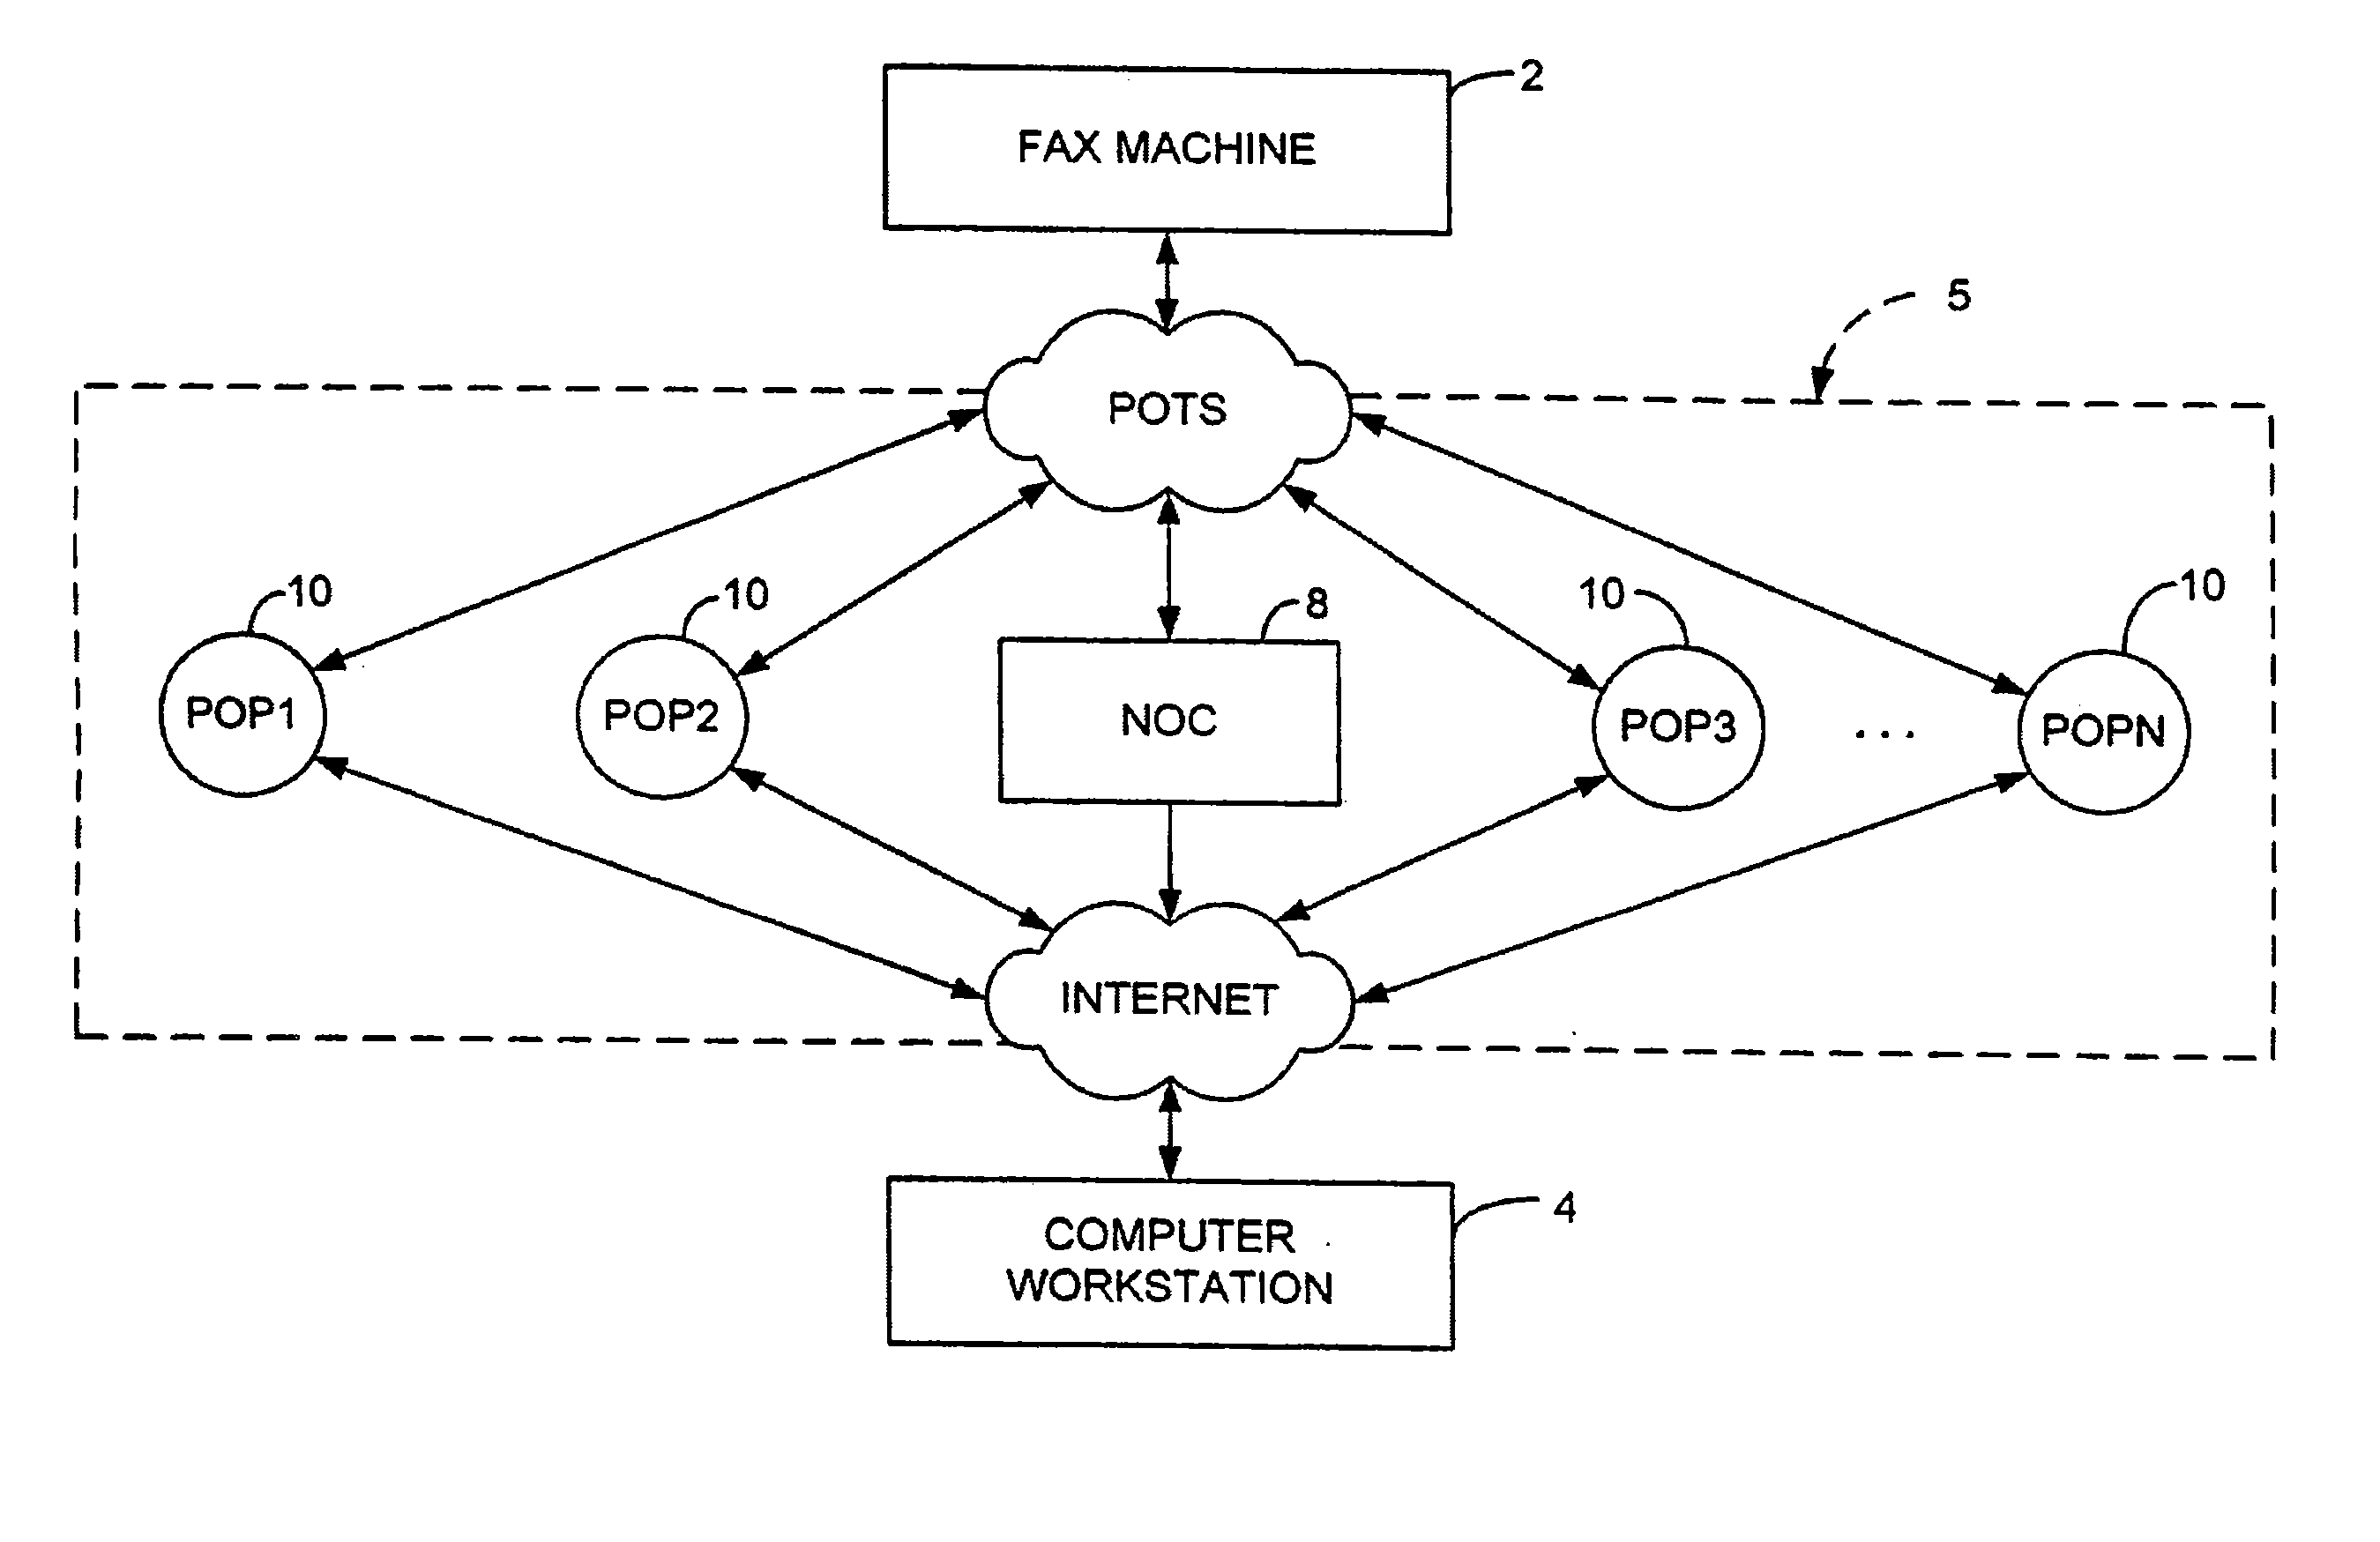 Methods and apparatus for compositing facsimile transmissions to electronic storage destinations